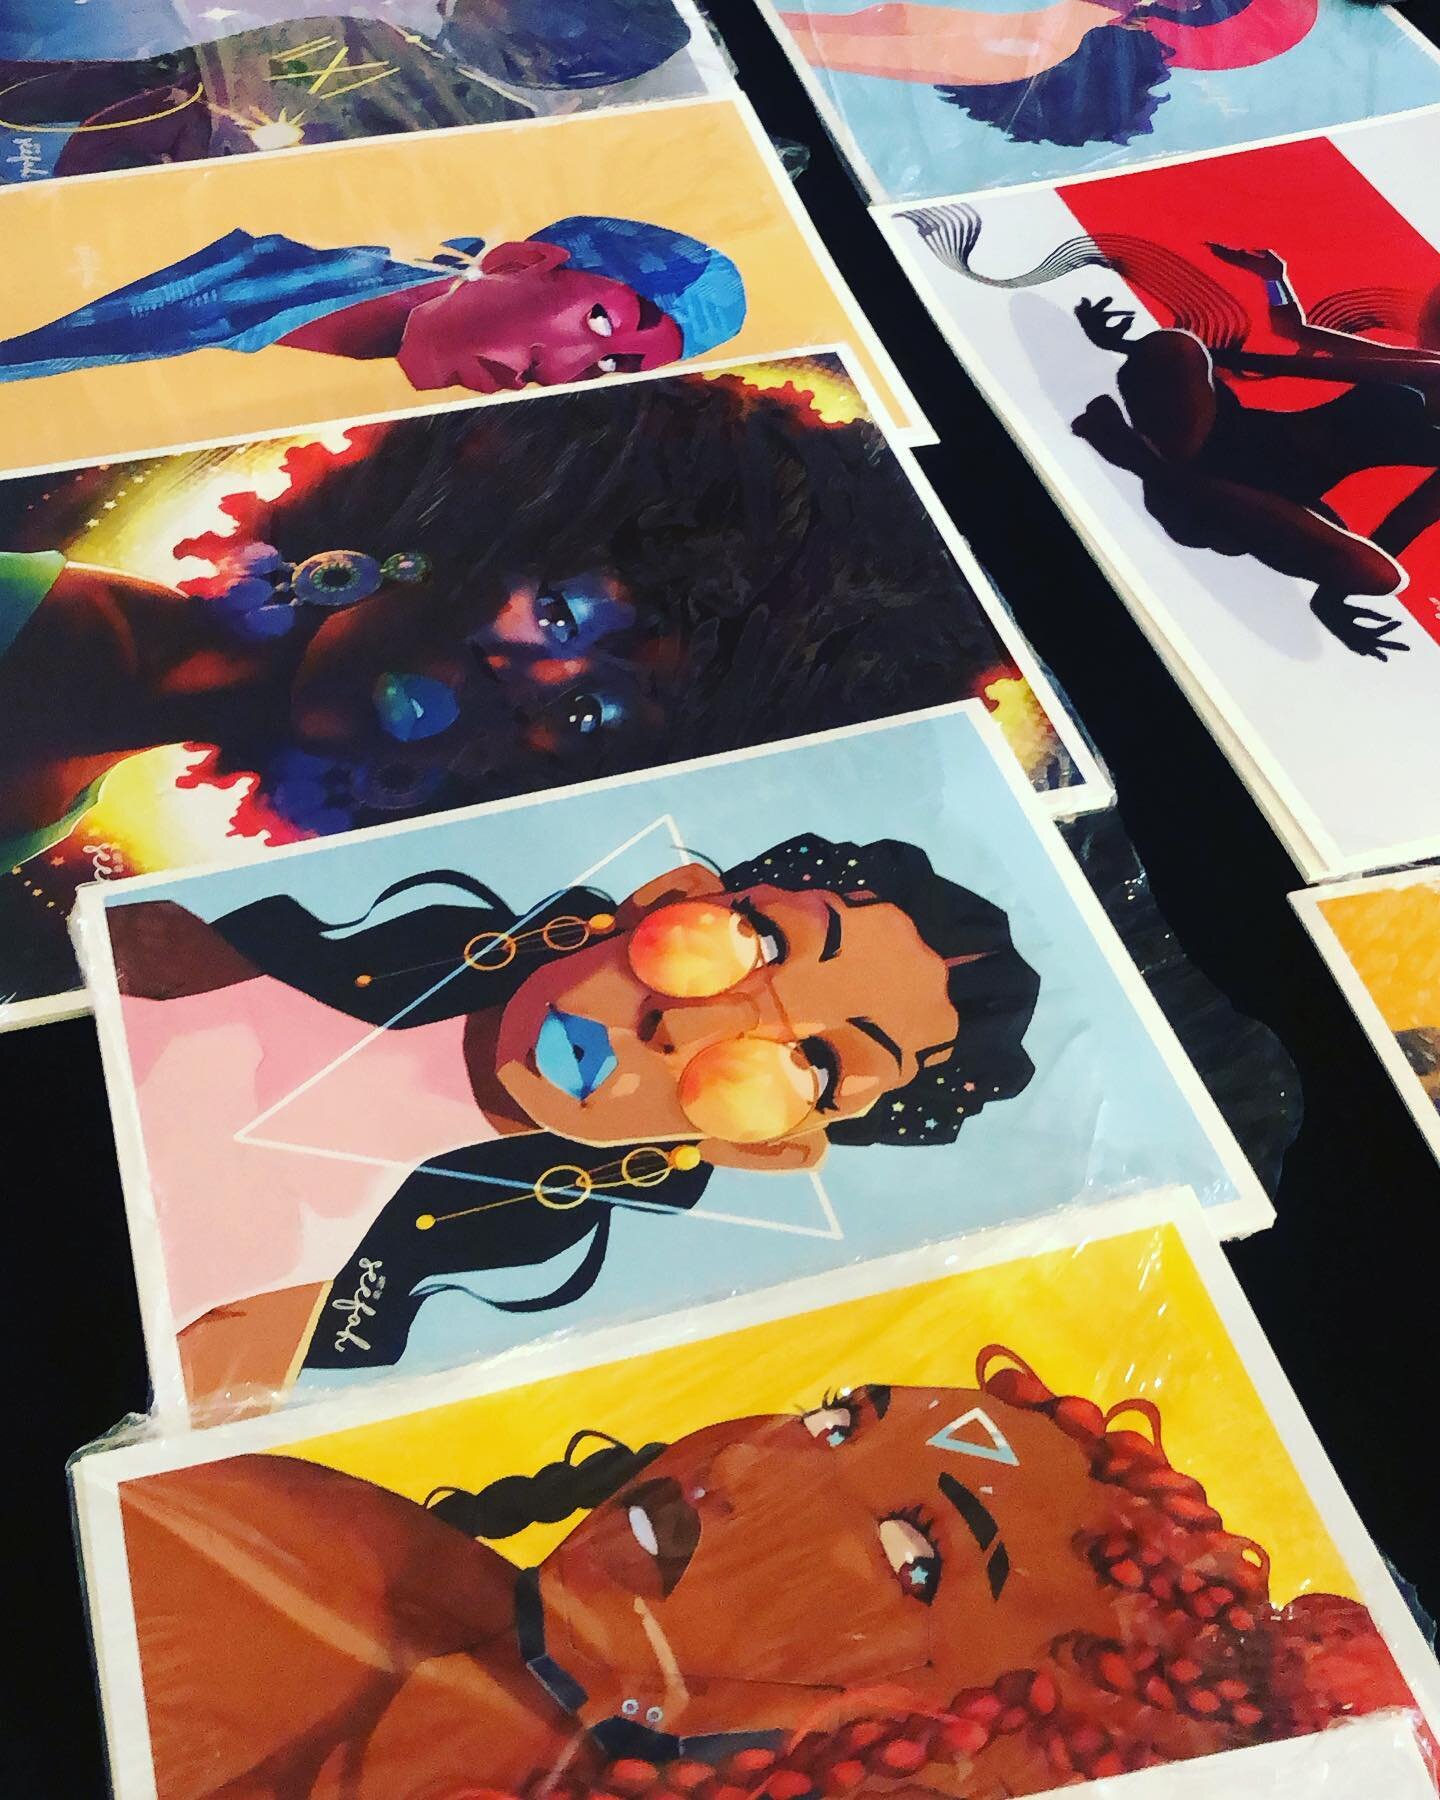 All of my prints are officially in!!! 95% ready to turn up @blackgirlartshow on Dec. 4. Check out me and 90+ other amazing artists this weekend. Secure your tickets now at BlackGirlArtShow.com

@art.of.seefah
.
.
.
#digitalart #blackgirlartshow #blac